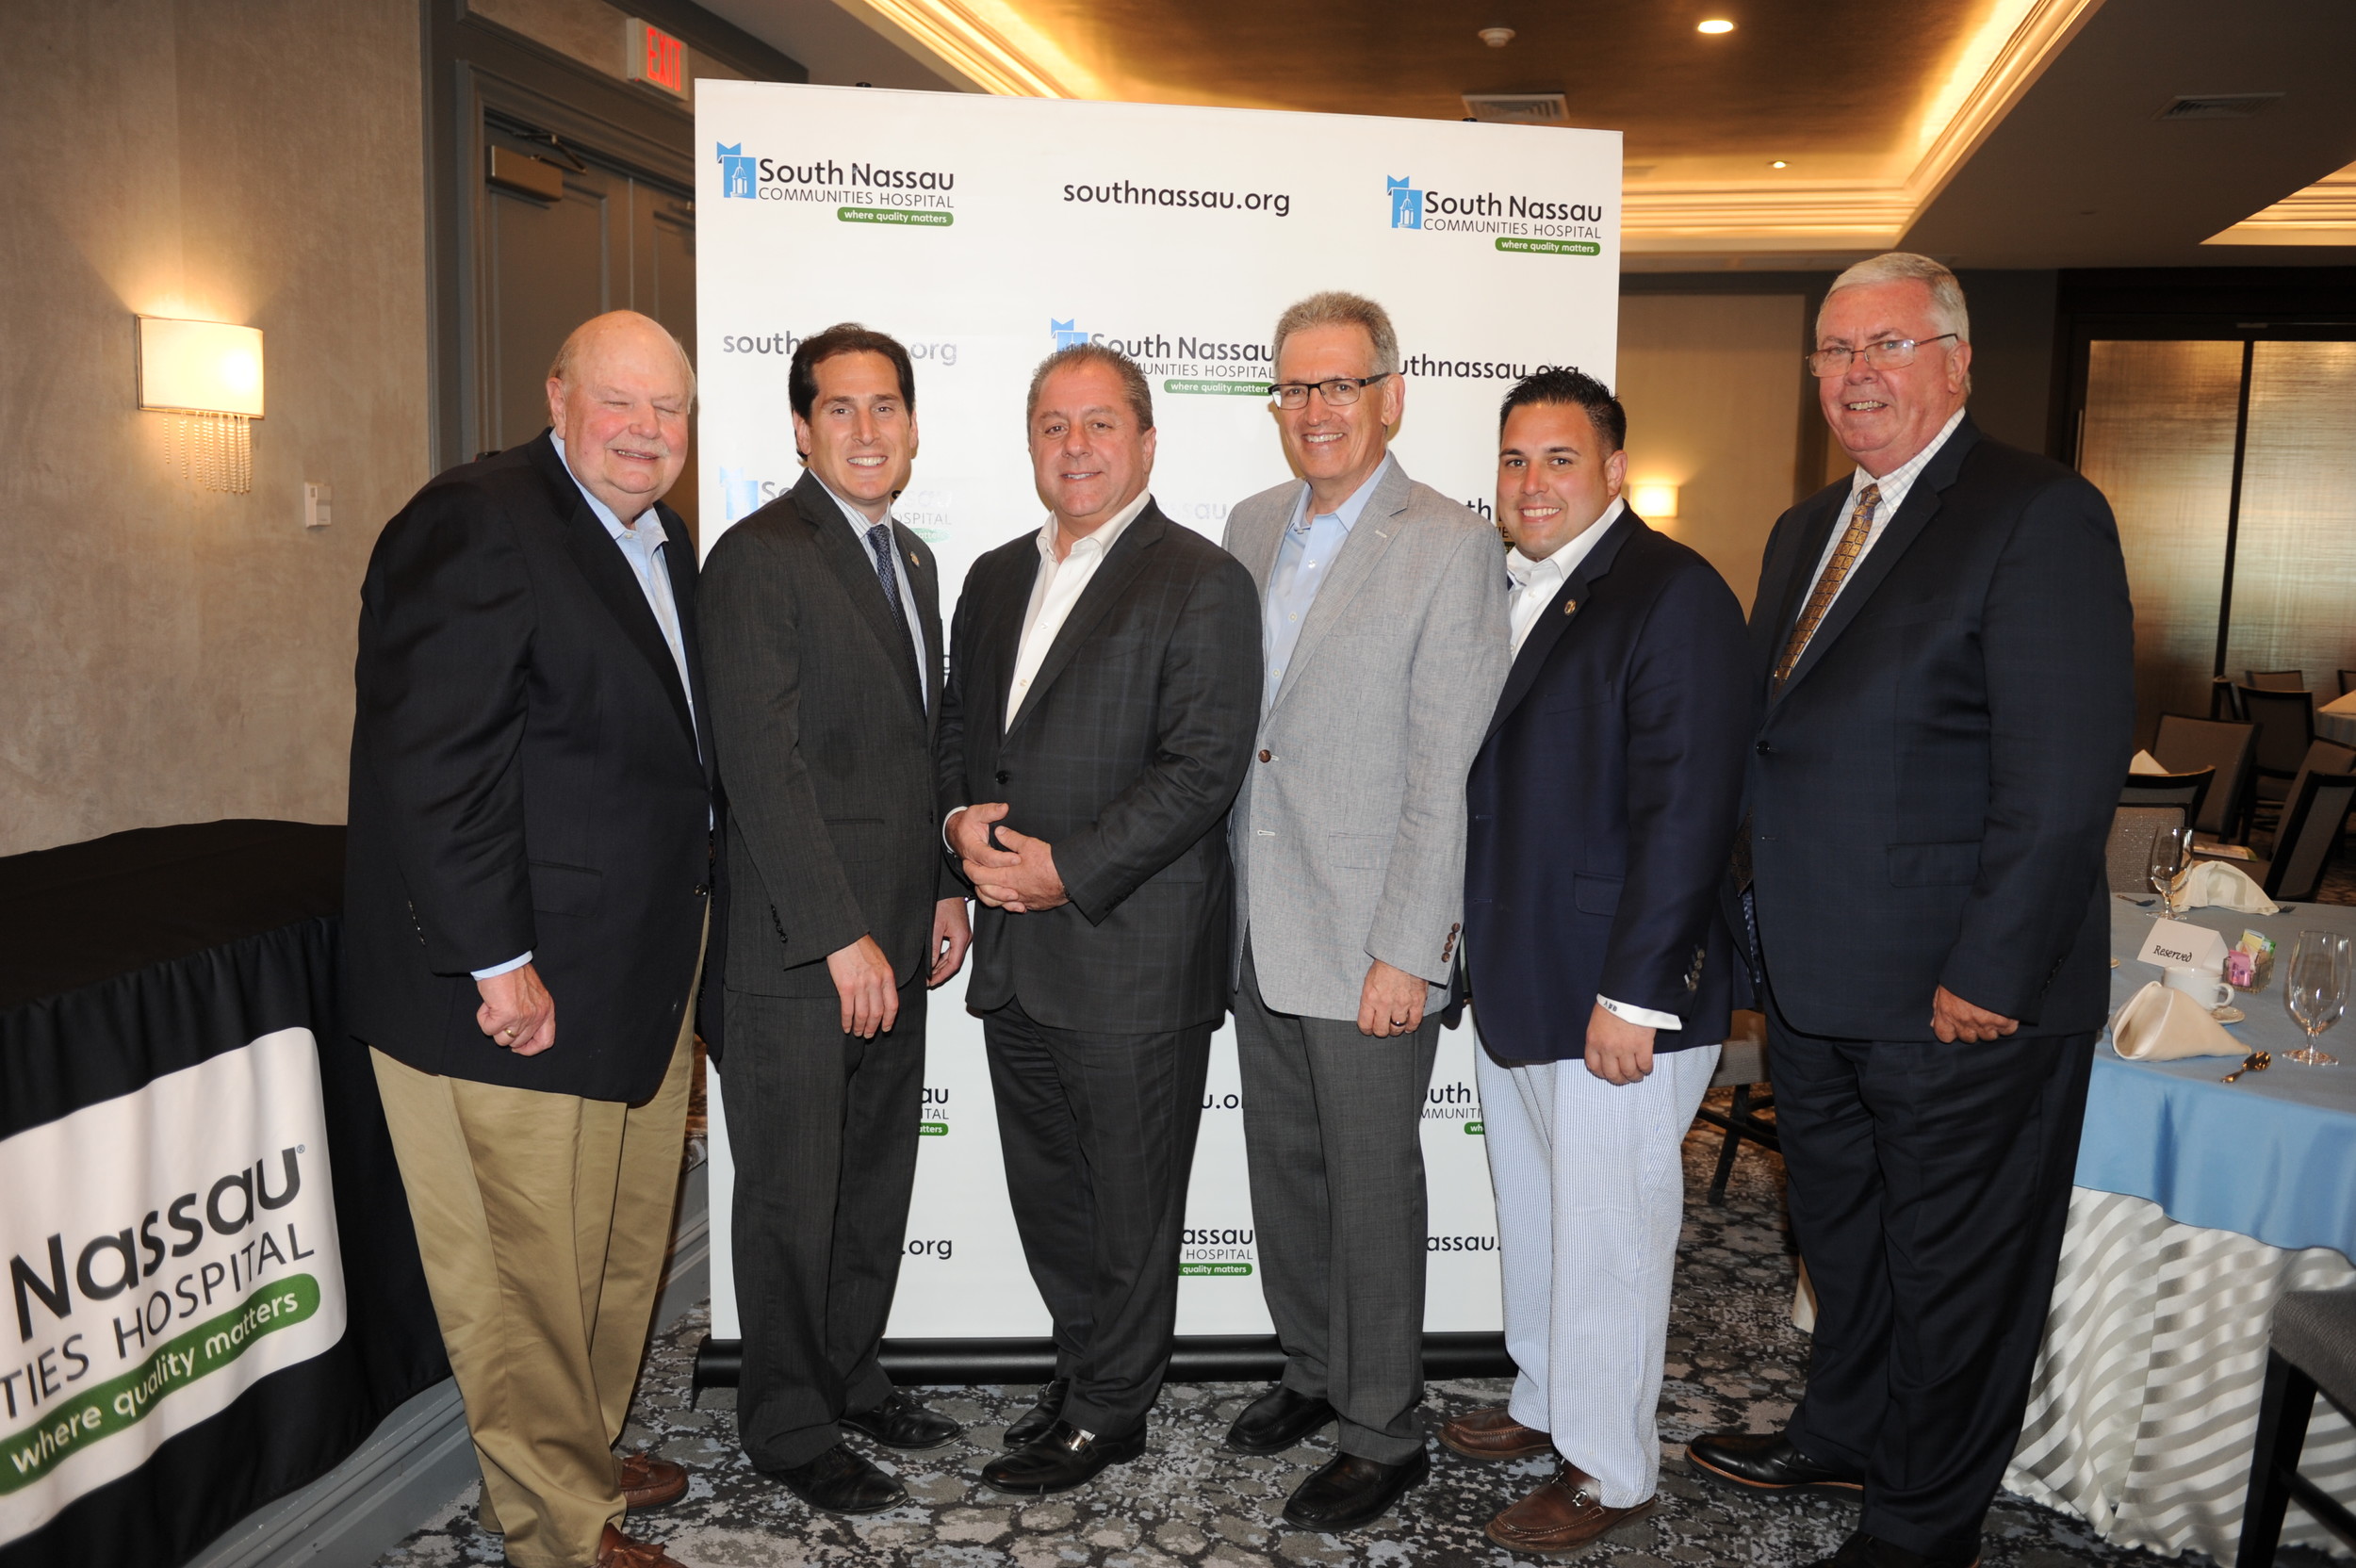 Joseph Fennessy, chairman of South Nassau Communities Hospital’s board of directors, far left; State Sen. Todd Kaminsky; Butch Yamali, president of the Dover Group; Wayne Lipton, founder of Concierge Choice Physicians LLC; Town of Hempstead Councilman Anthony D’Esposito; and Richard J. Murphy, the hospital’s president and CEO.